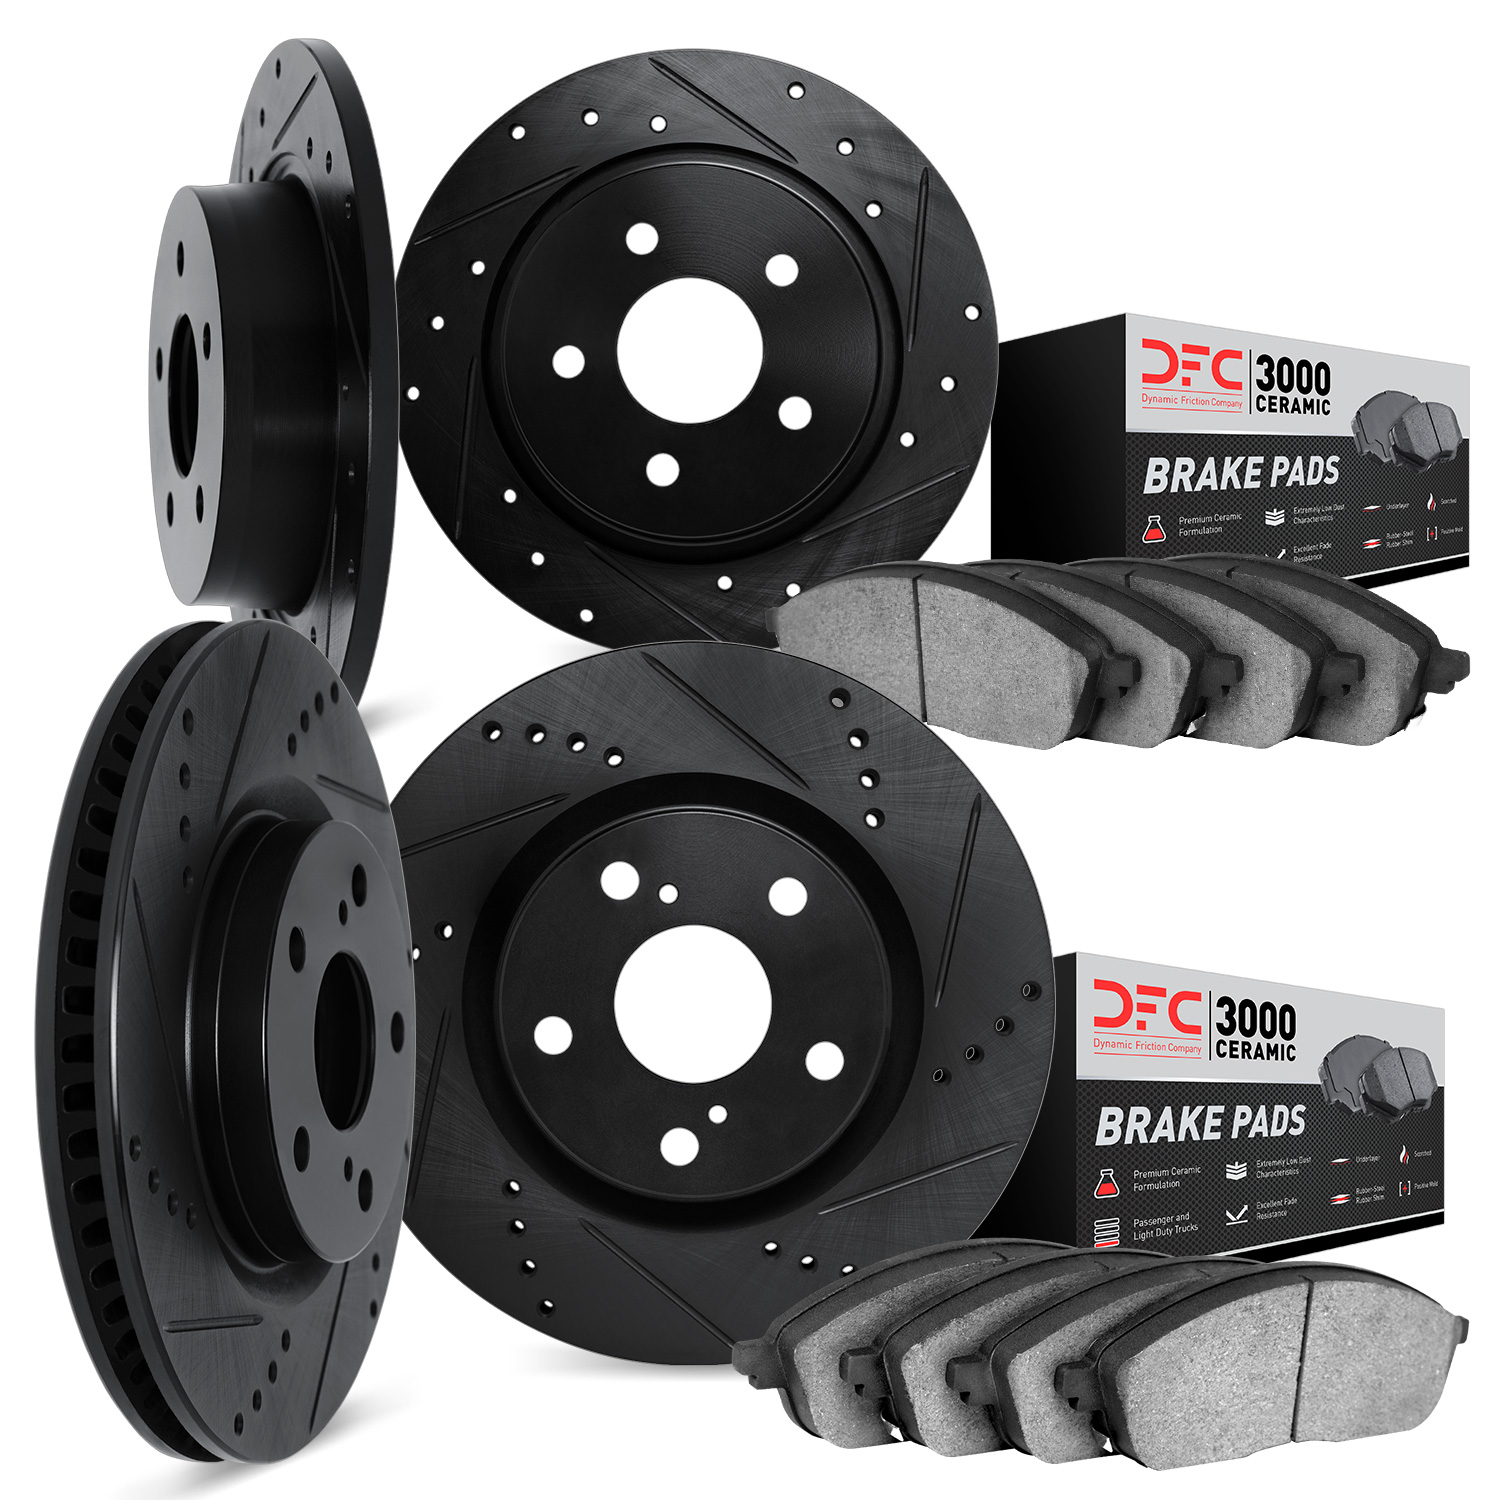 8304-13016 Drilled/Slotted Brake Rotors with 3000-Series Ceramic Brake Pads Kit [Black], 2002-2003 Subaru, Position: Front and R